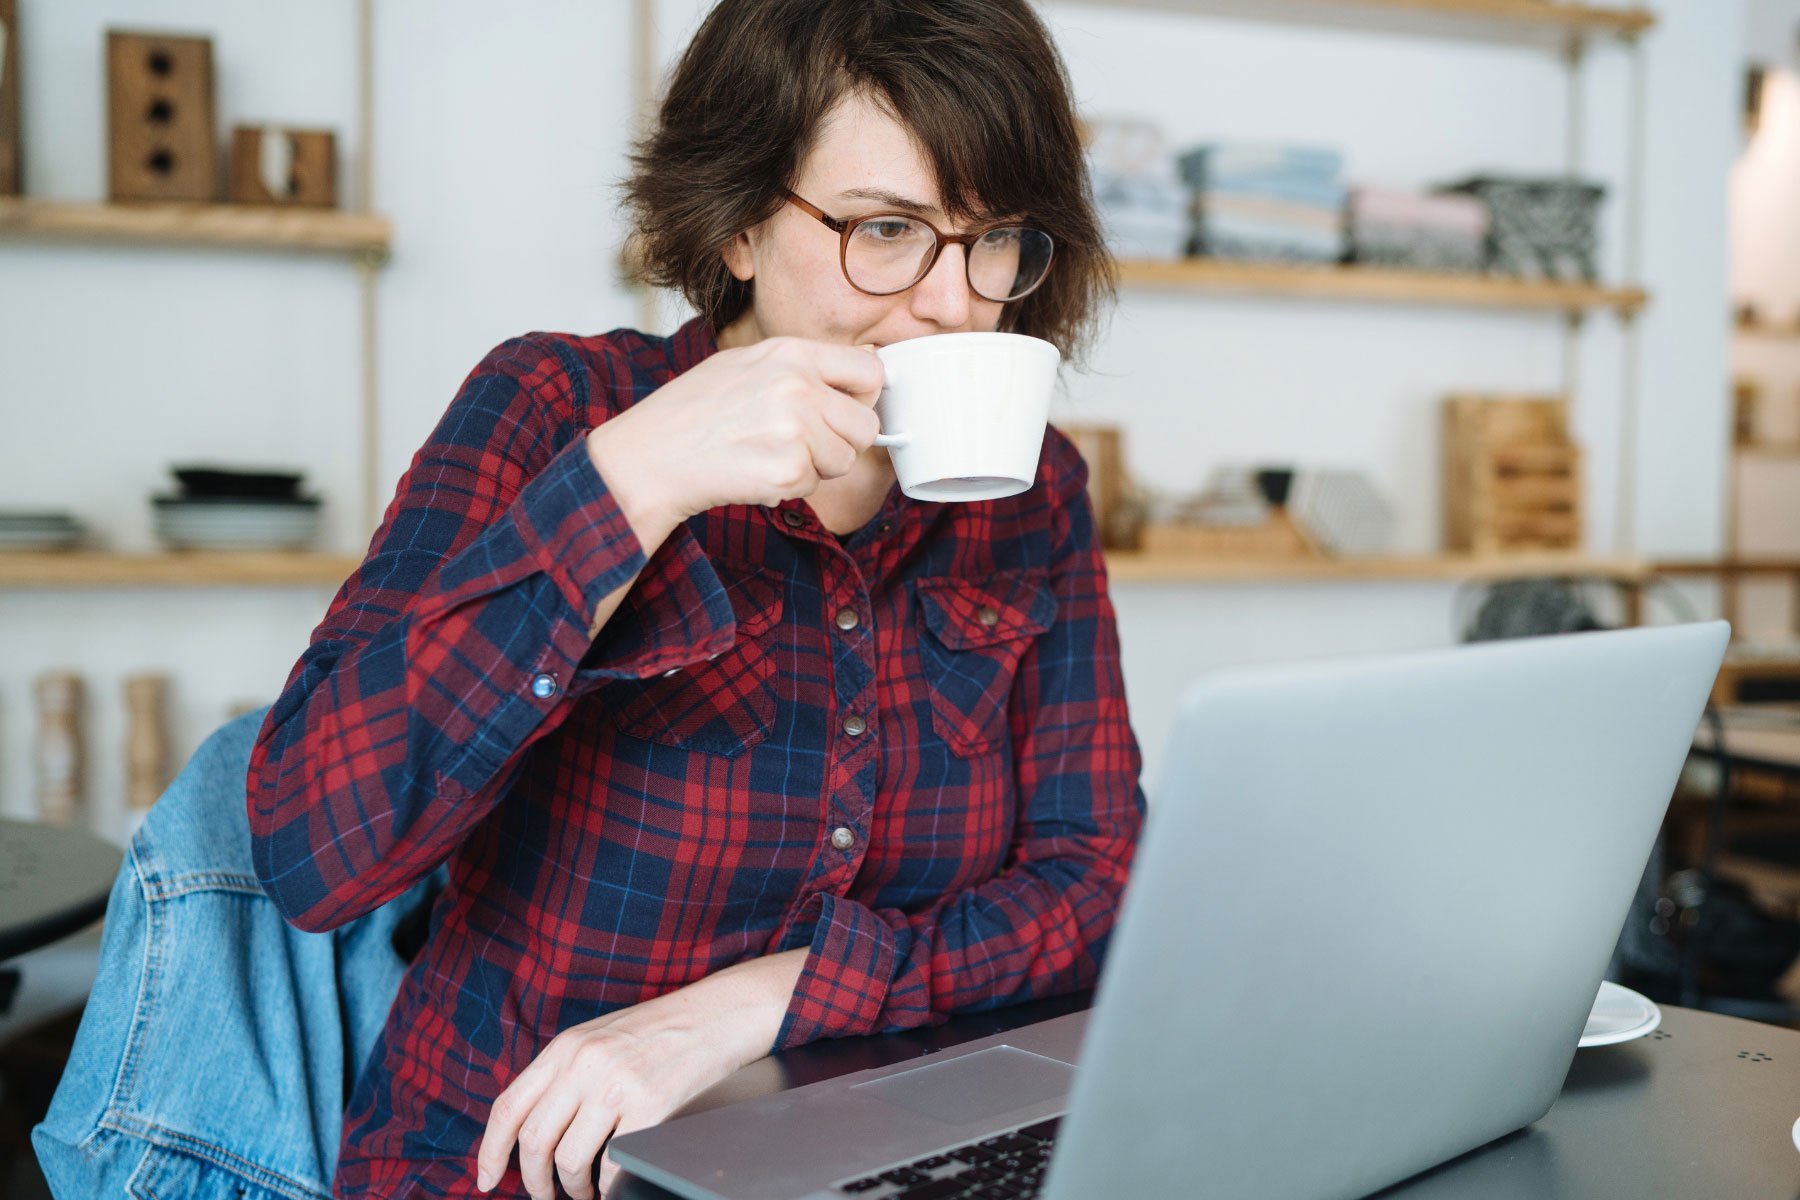 Lady sipping a mug of coffee at a laptop